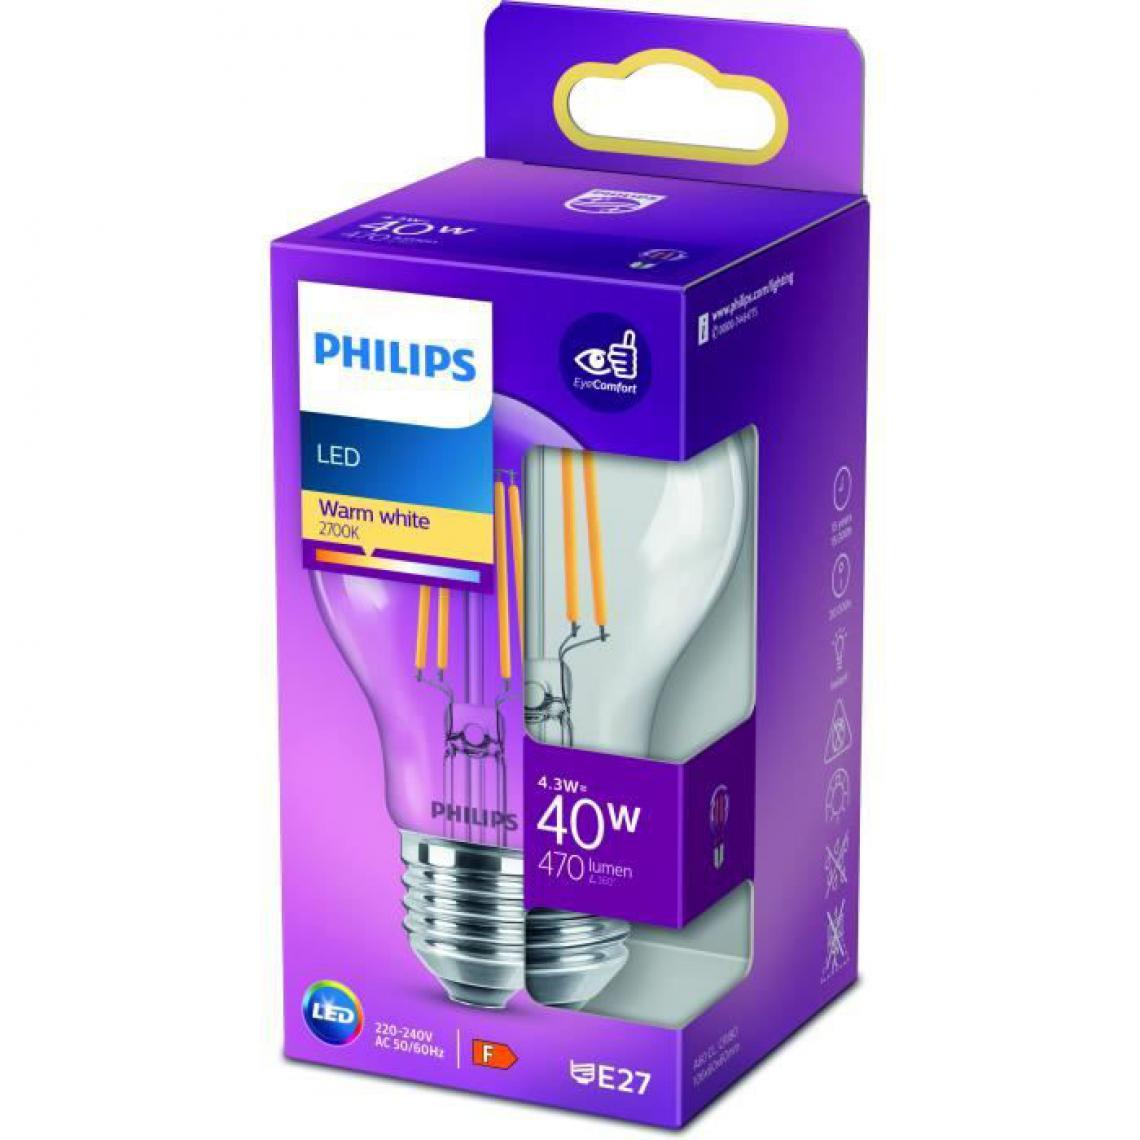 Philips - PHILIPS LED Classic 40W Standard E27 Blanc Chaud Non Dimmable - Ampoules LED